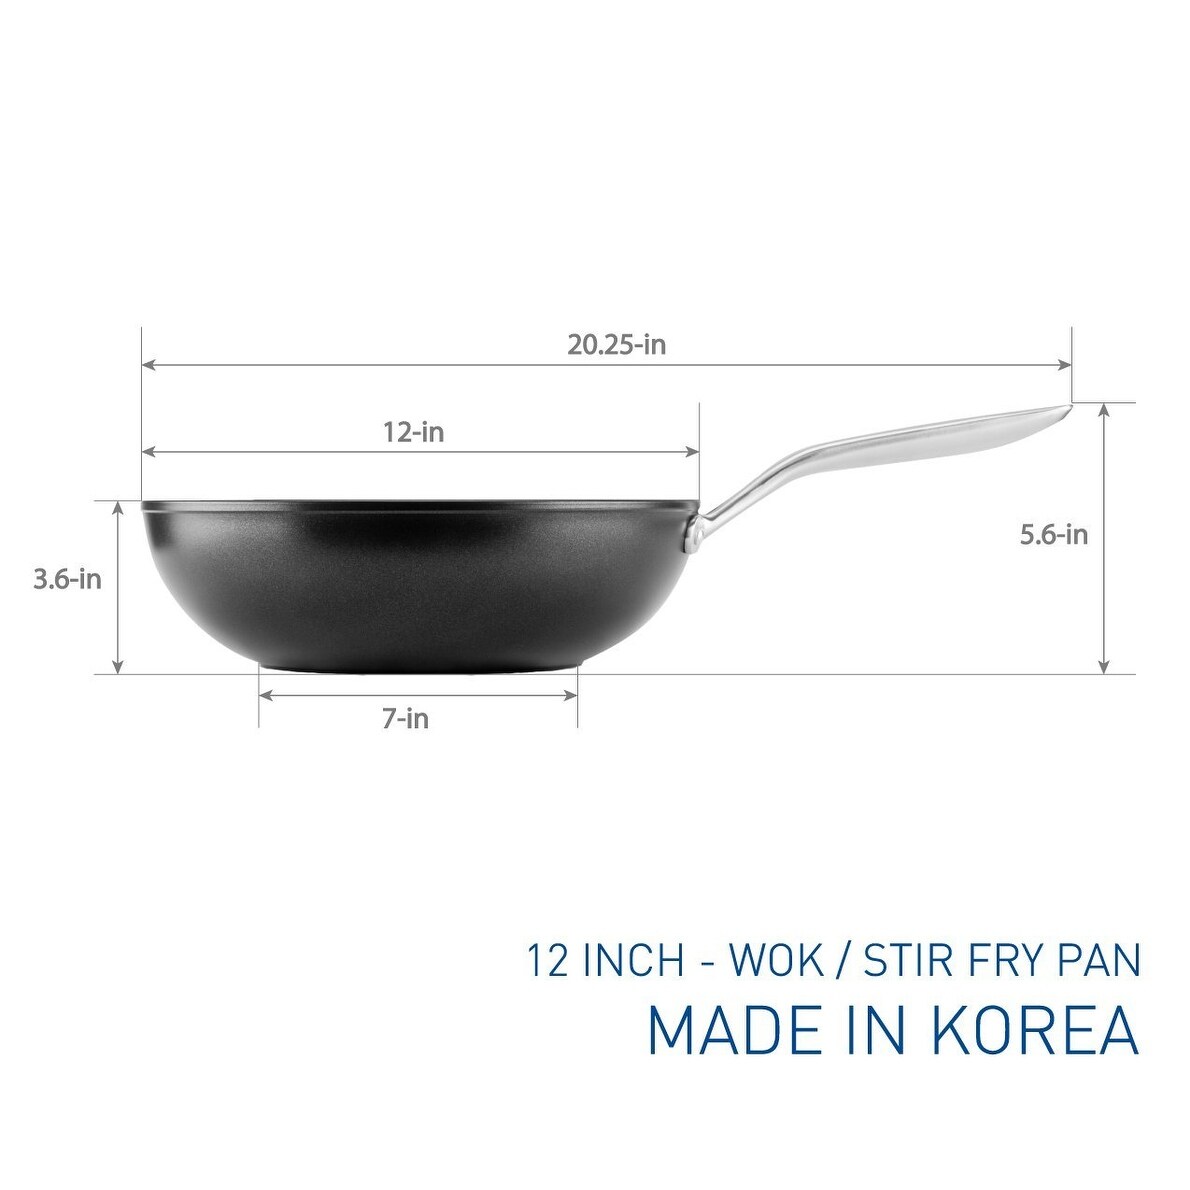 https://ak1.ostkcdn.com/images/products/is/images/direct/2d6be0df82a72e68f20ababecffce383ec1dc4f0/Onyx-Collection---12-Inch-Wok-Stir-Fry-Pan-with-Cover.jpg